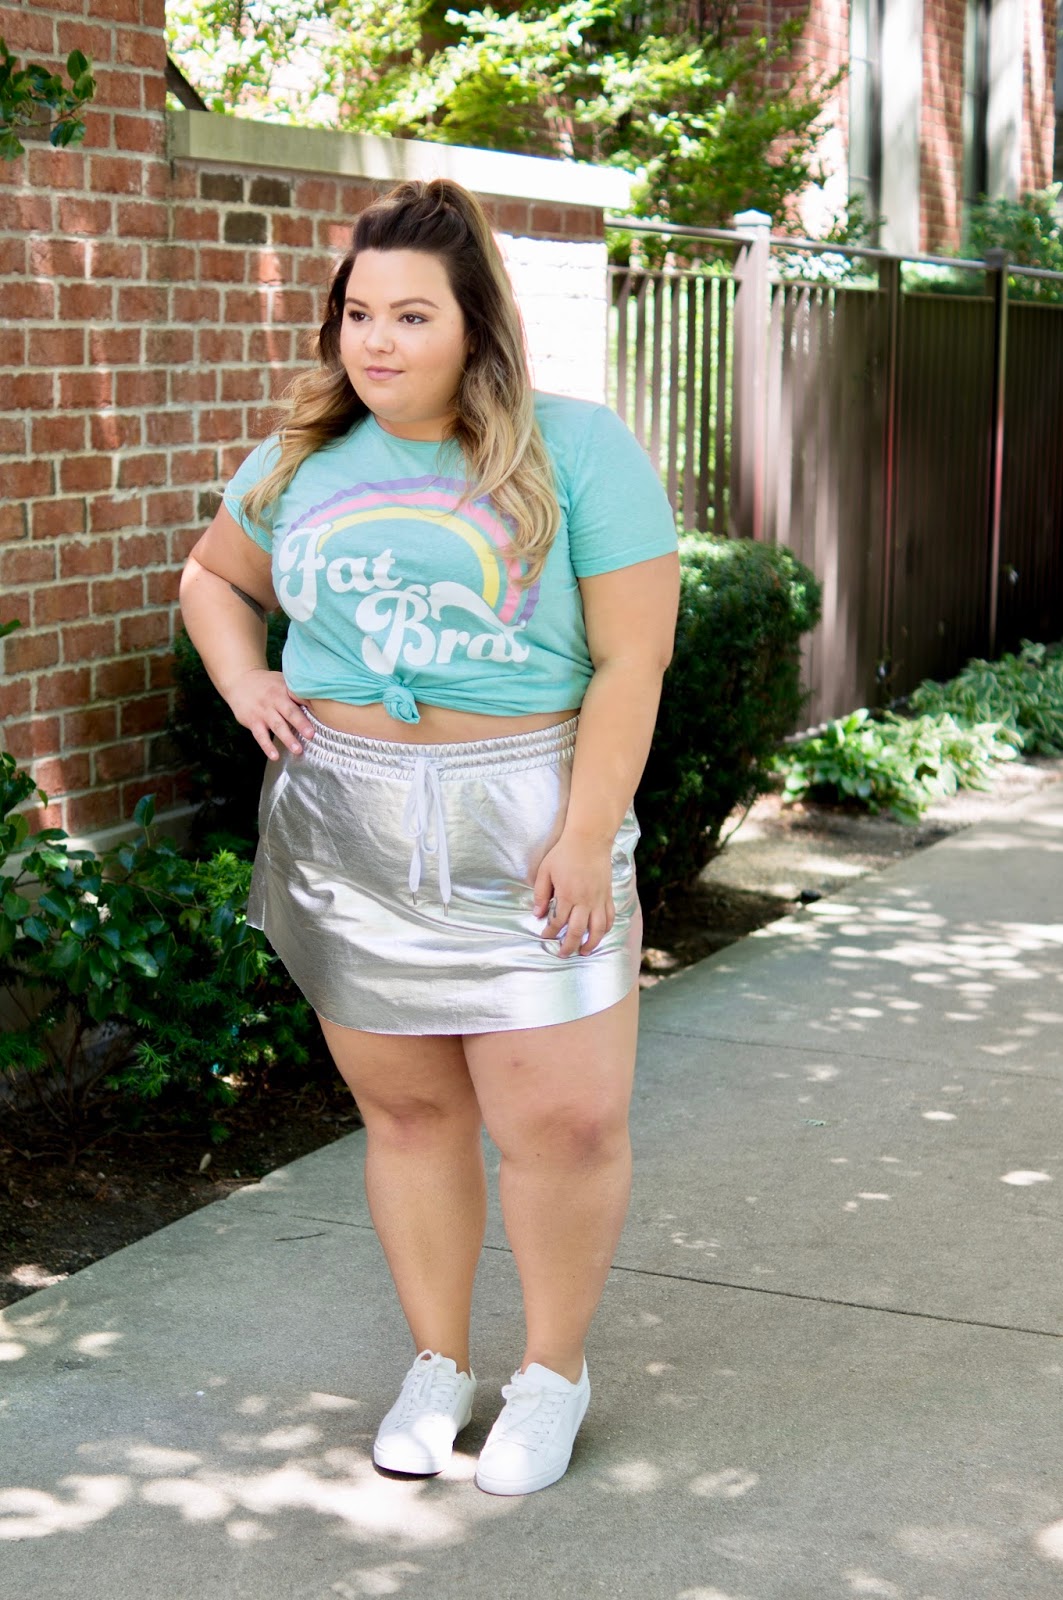 fat acceptance, fat girl flow, corissa, fat brat t-shirt, reclaim fat, fat is not a bad word, natalie in the city, Chicago, plus size fashion blogger, Chicago plus size fashion blogger, scorch magazine, fat and fabulous, curves and confidence, midwest blogger, Chicago fashion, forever 21 metallic skirt